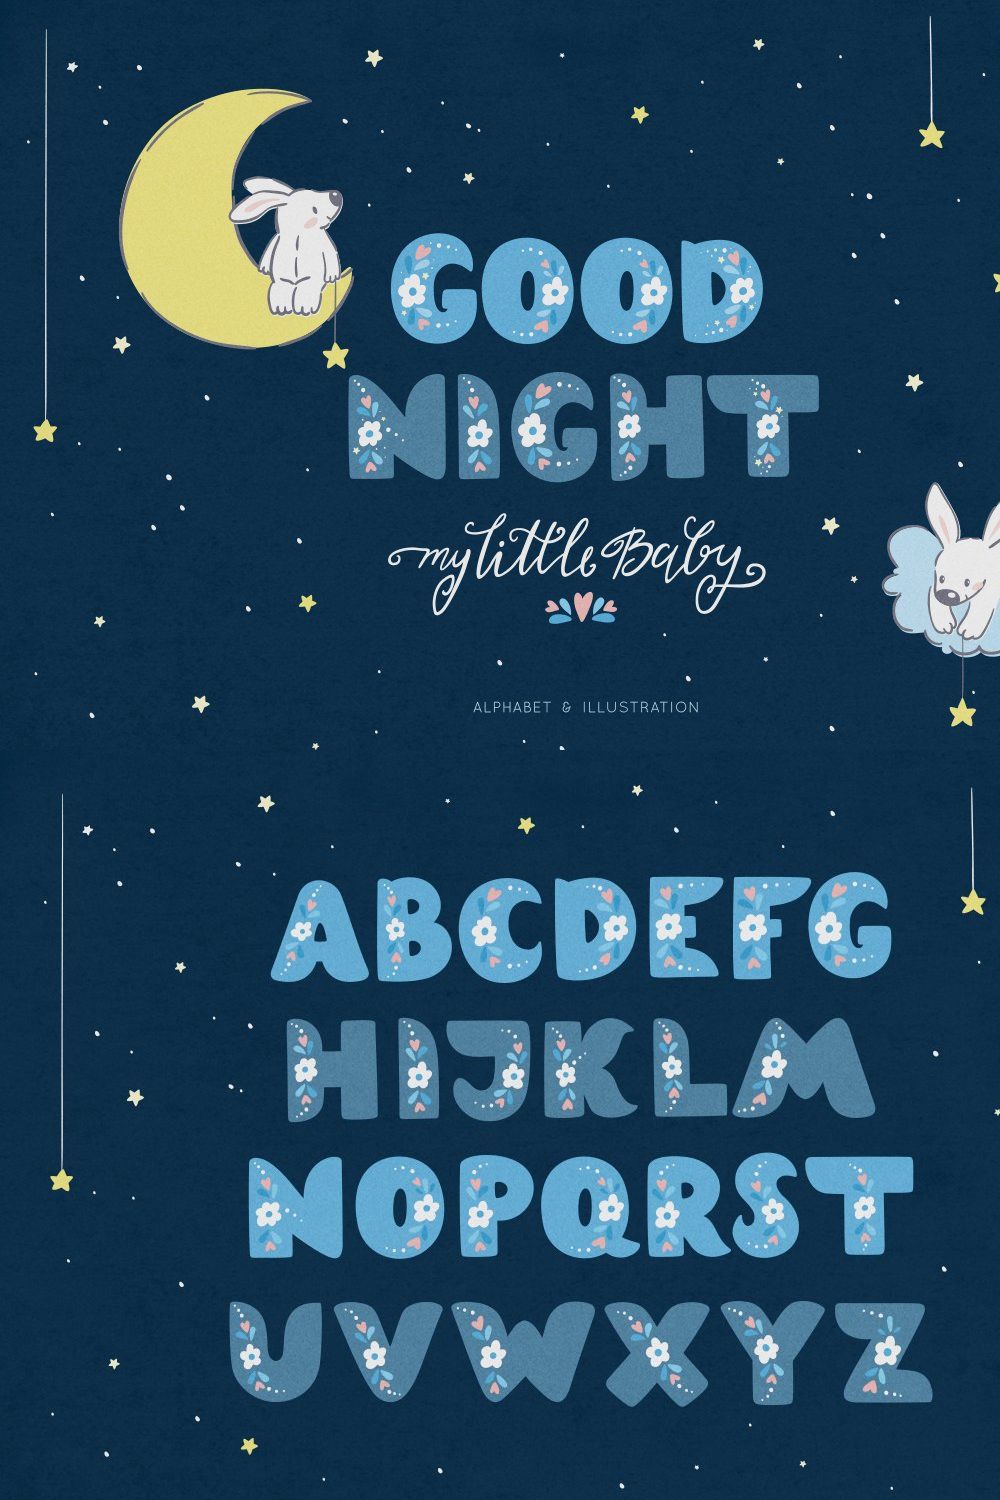 Good night collection pinterest preview image.